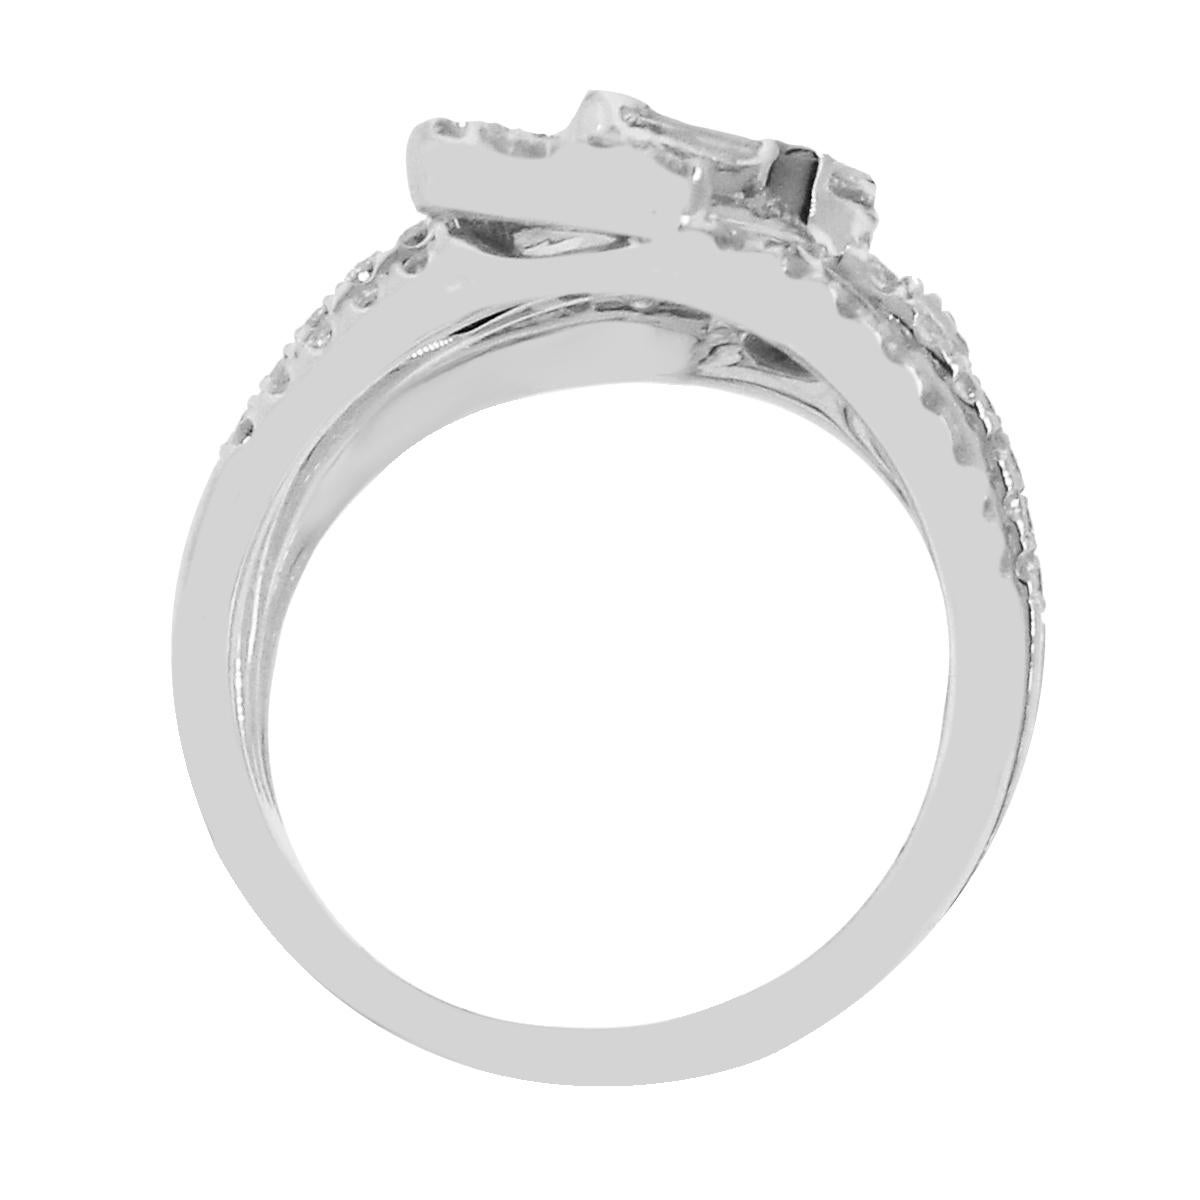 Round Cut 1.74 Carat Diamond Cocktail Ring For Sale